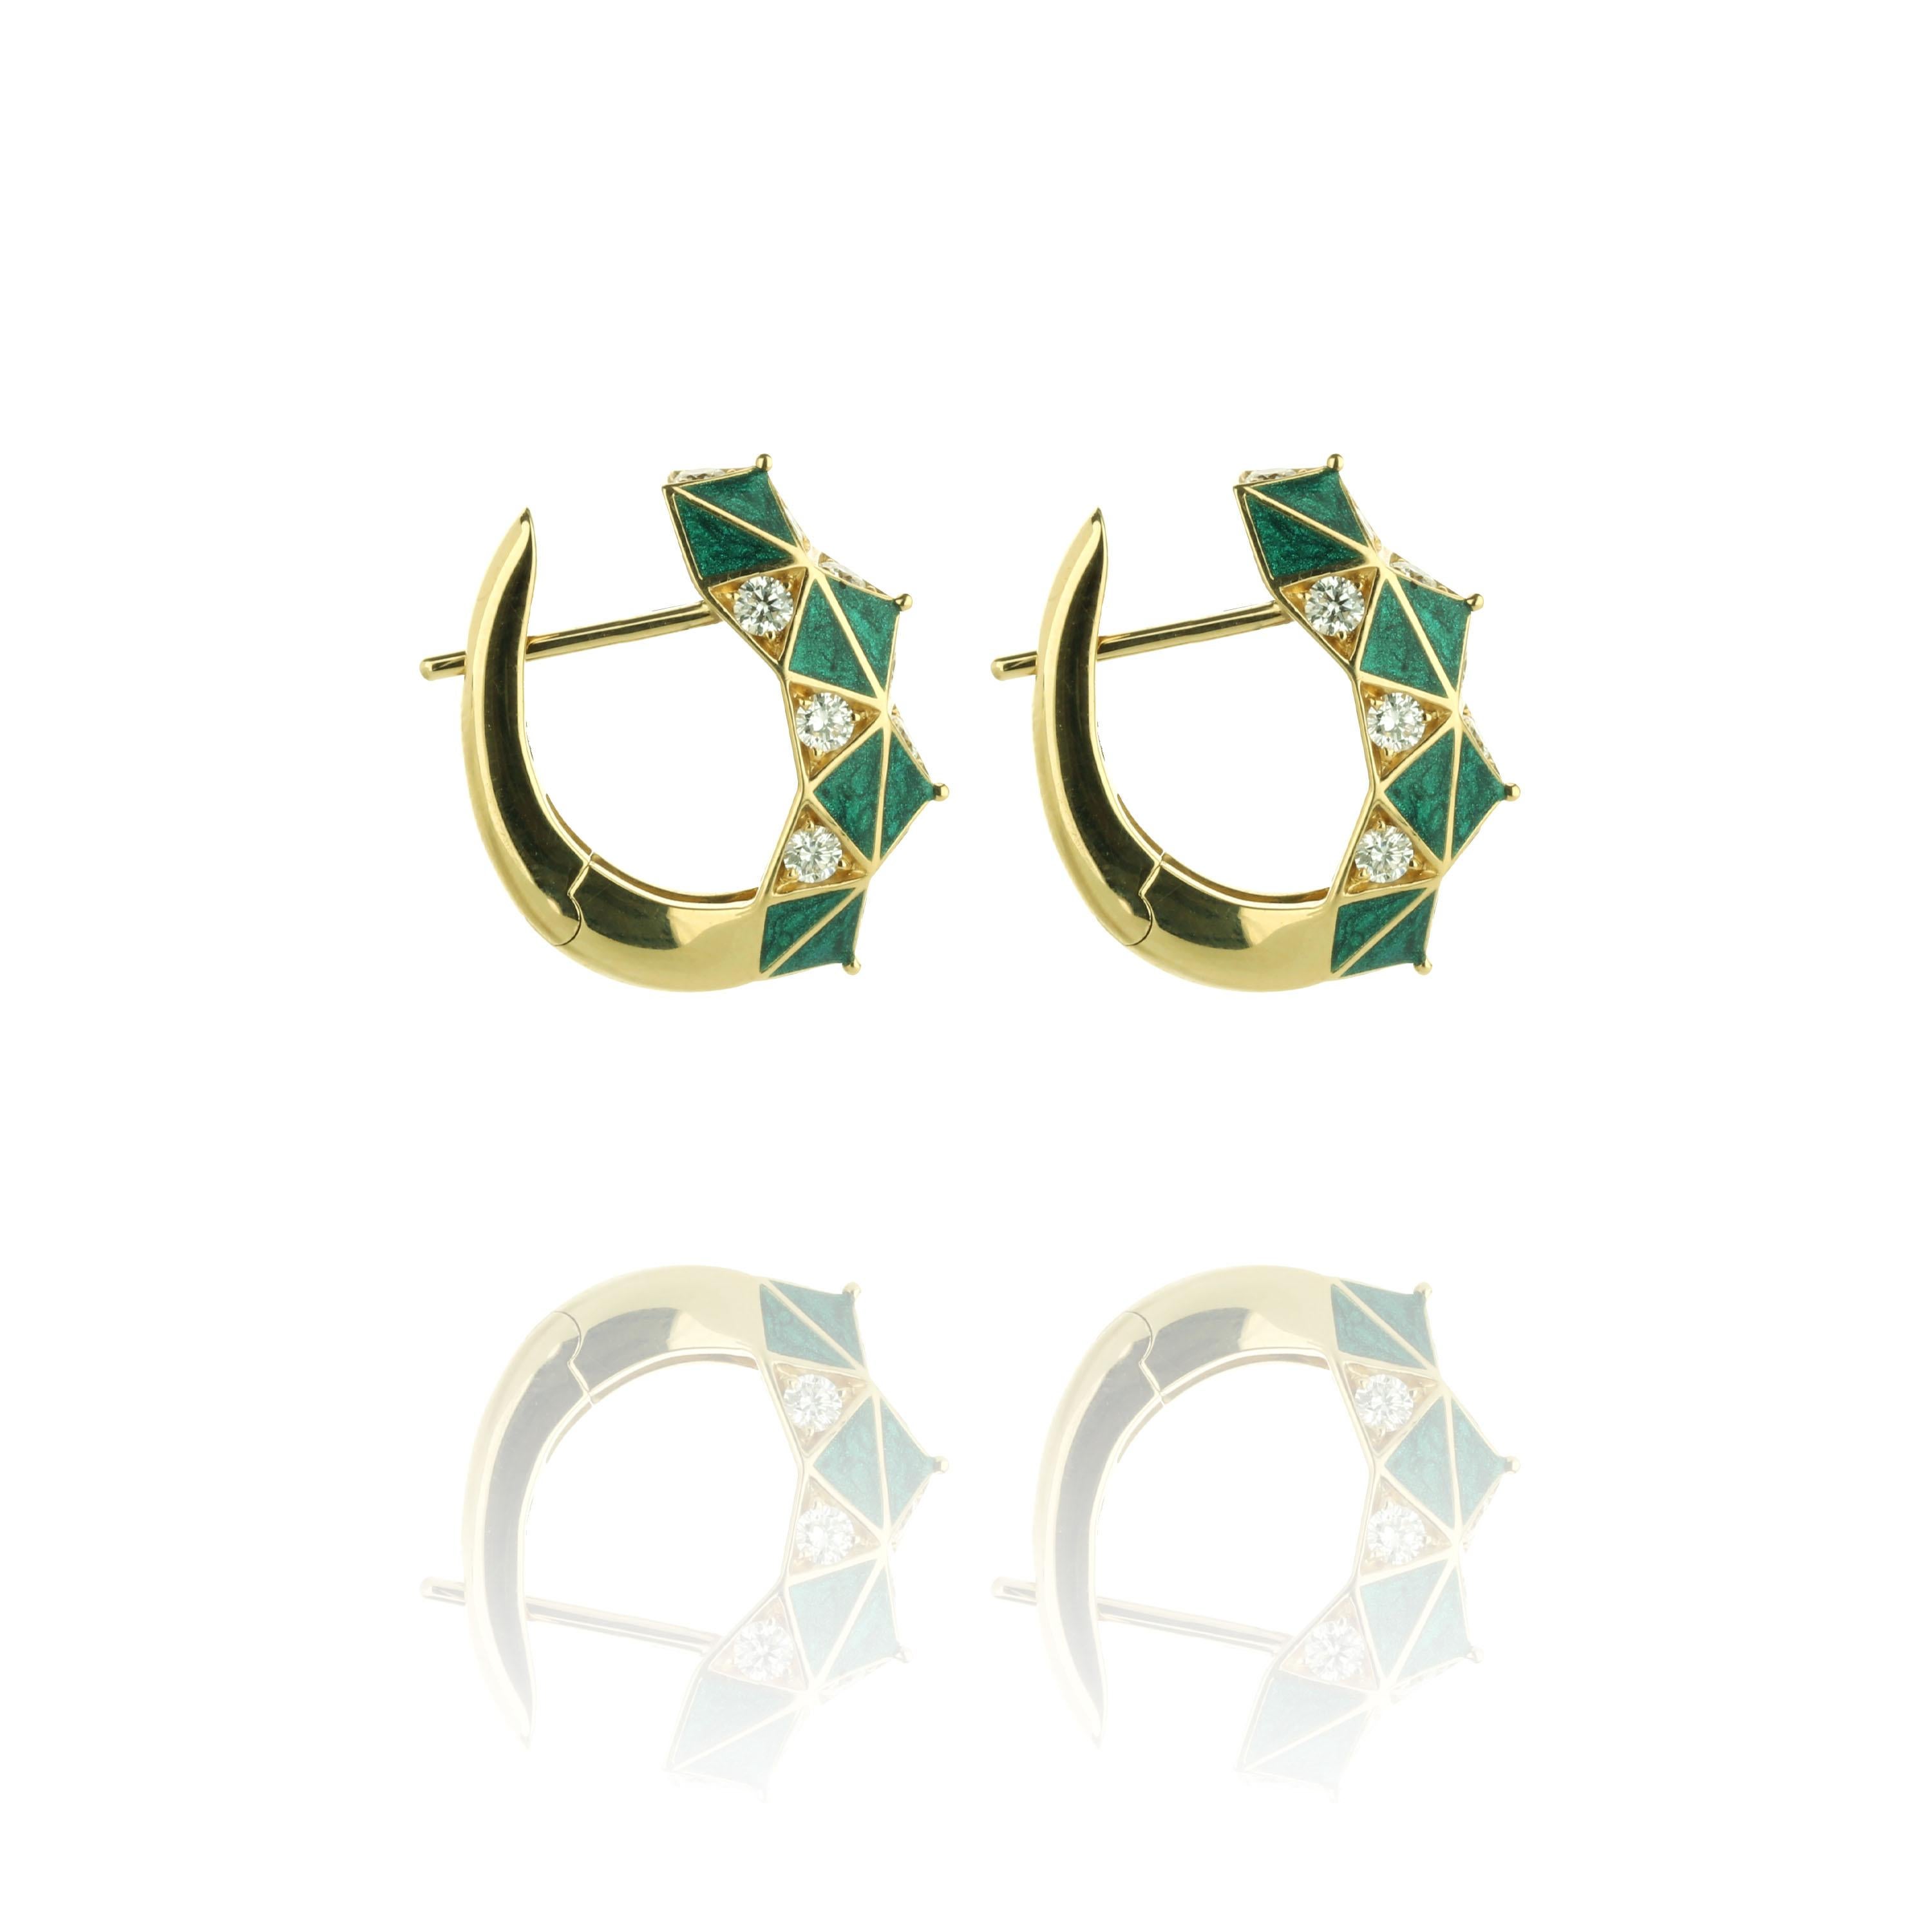 Contemporary Gold Diamond and Green Enamel Hoop Earrings For Sale